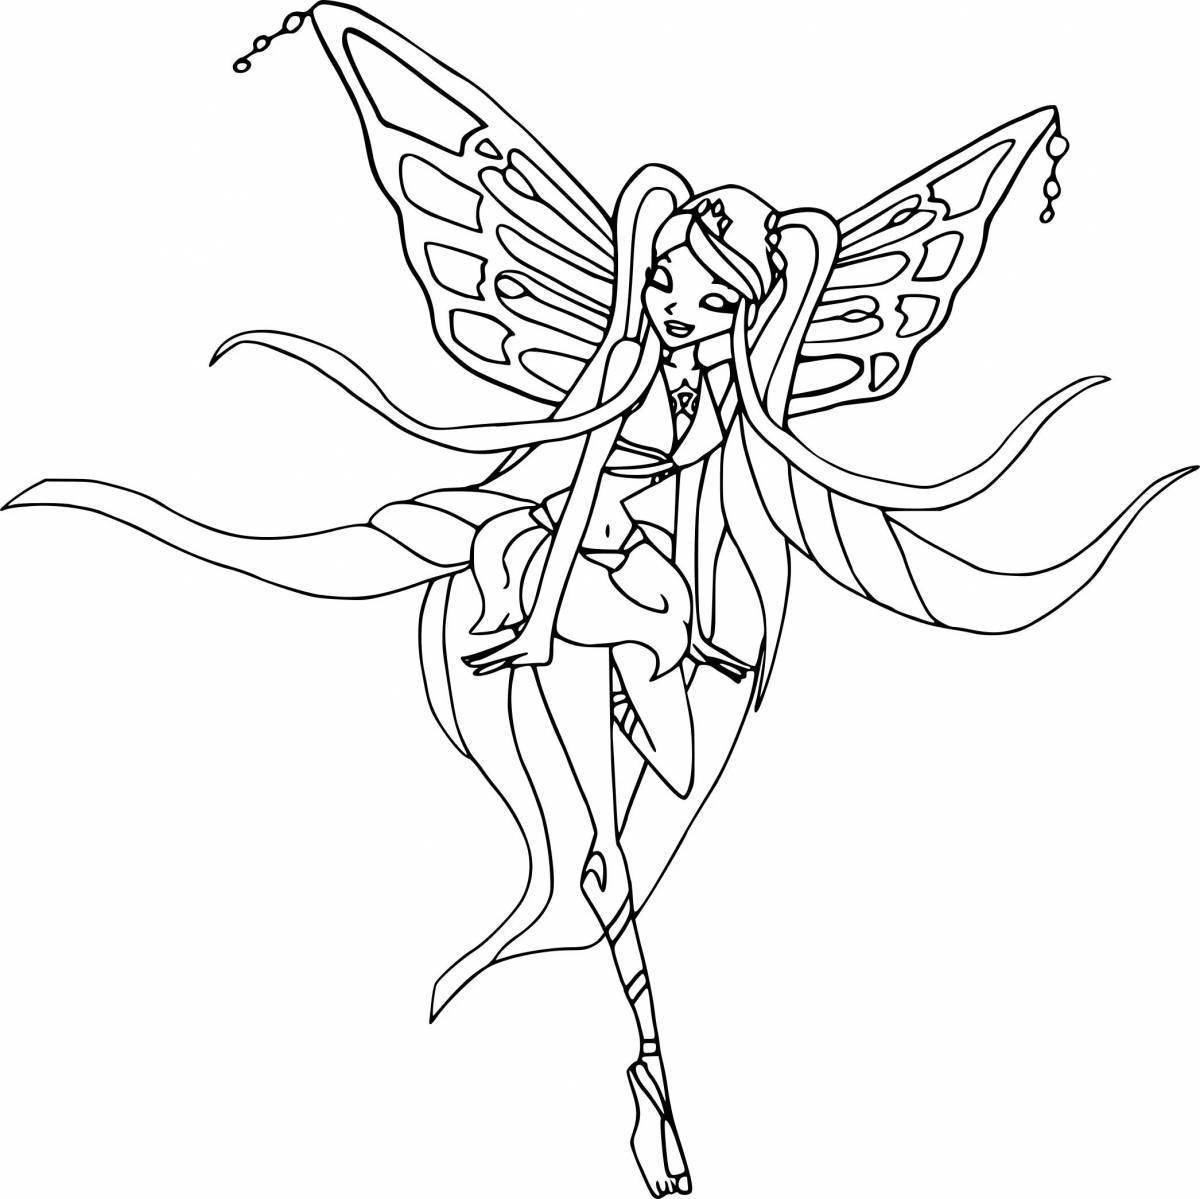 Winx Stella coloring book with backlight